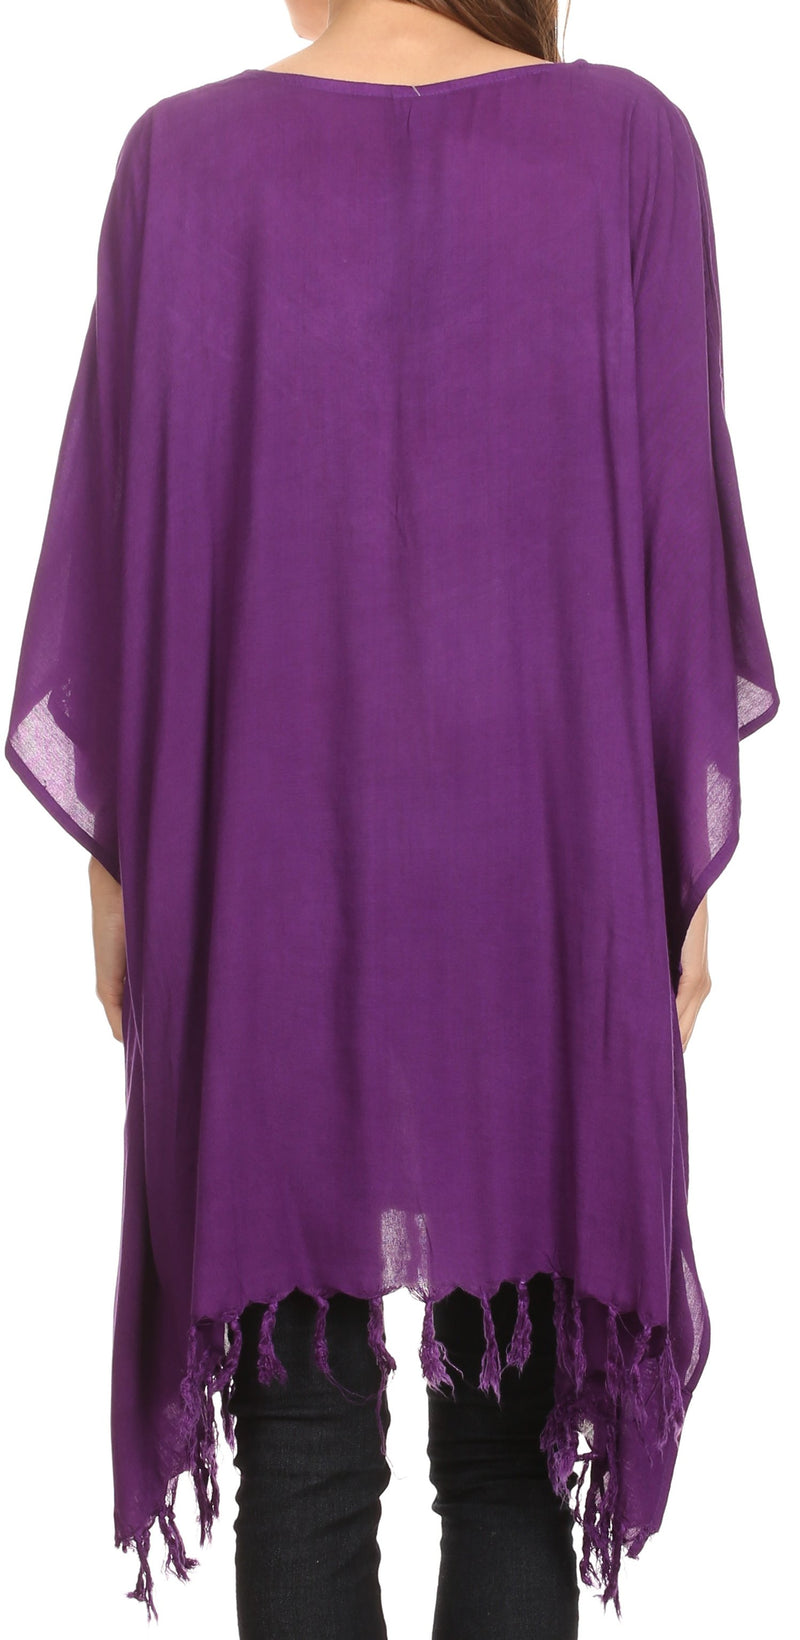 Sakkas  Ballary Embroidered Square Poncho Top Open Sleeves Cover Up With Fringe